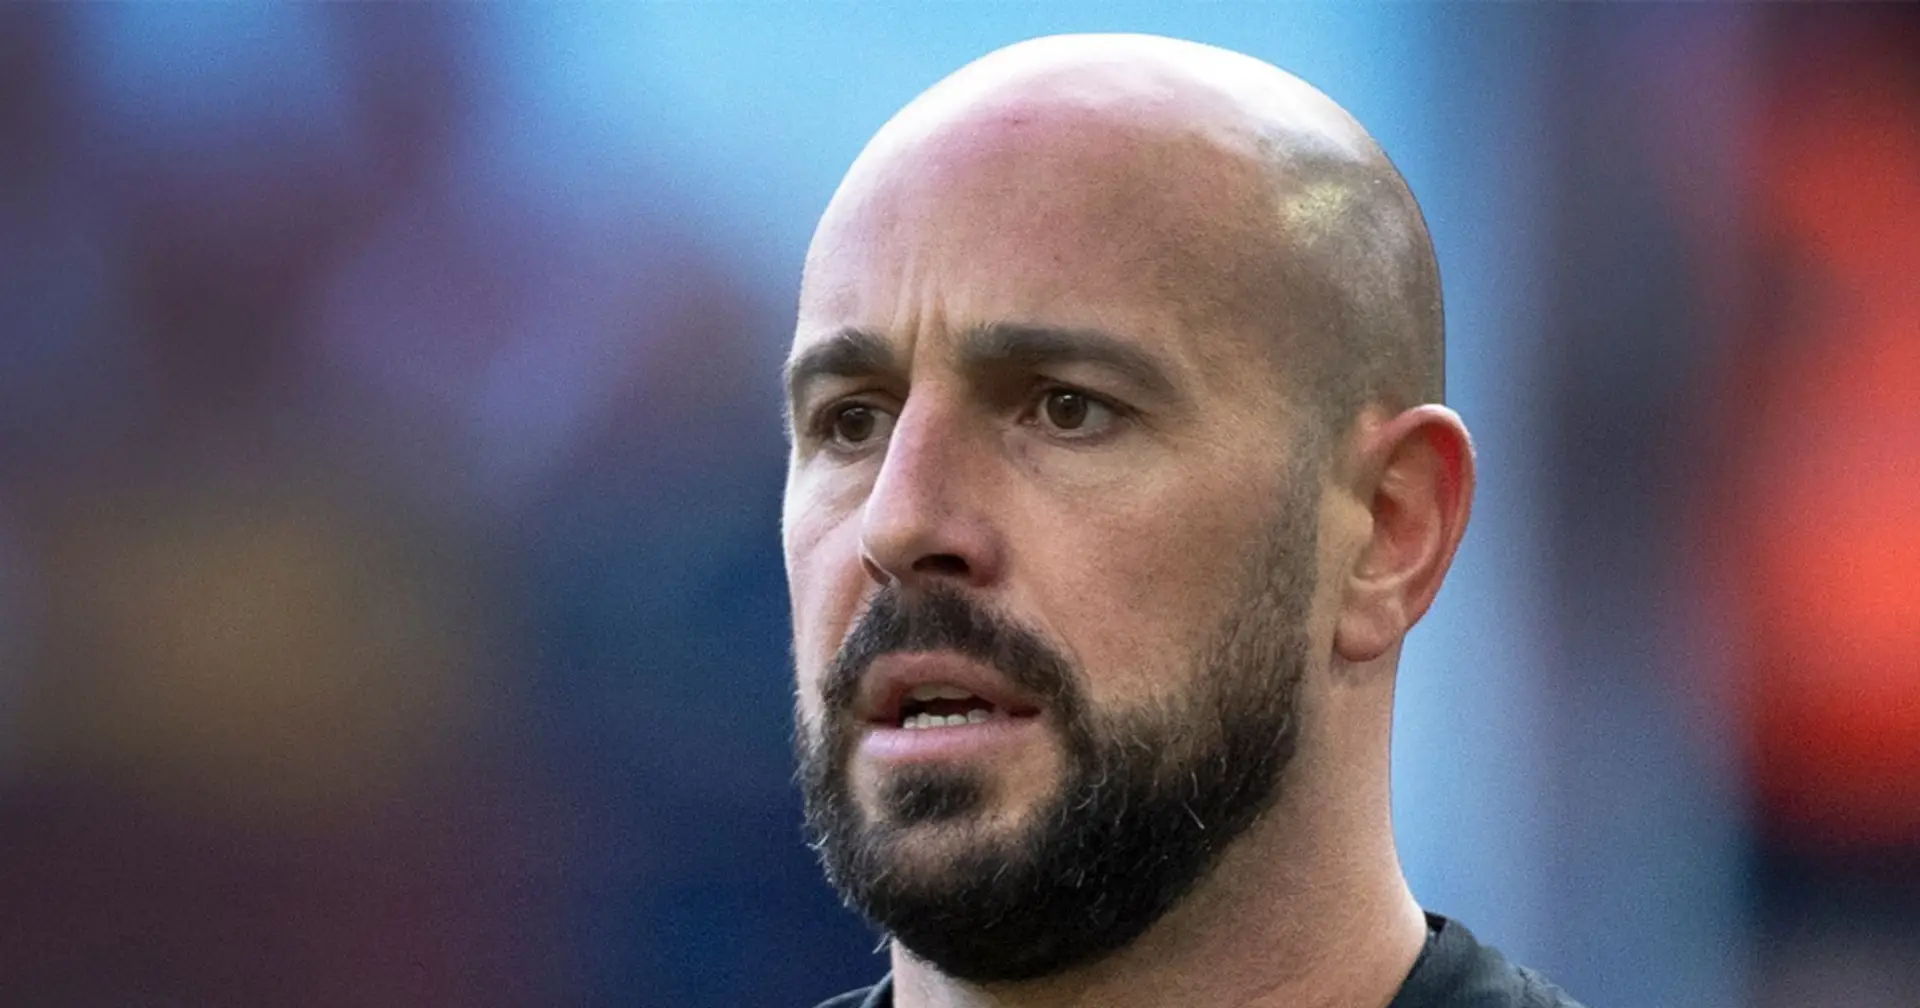 Reina believes he has recovered from coronavirus: 'Last week it was my turn to go through the bug'